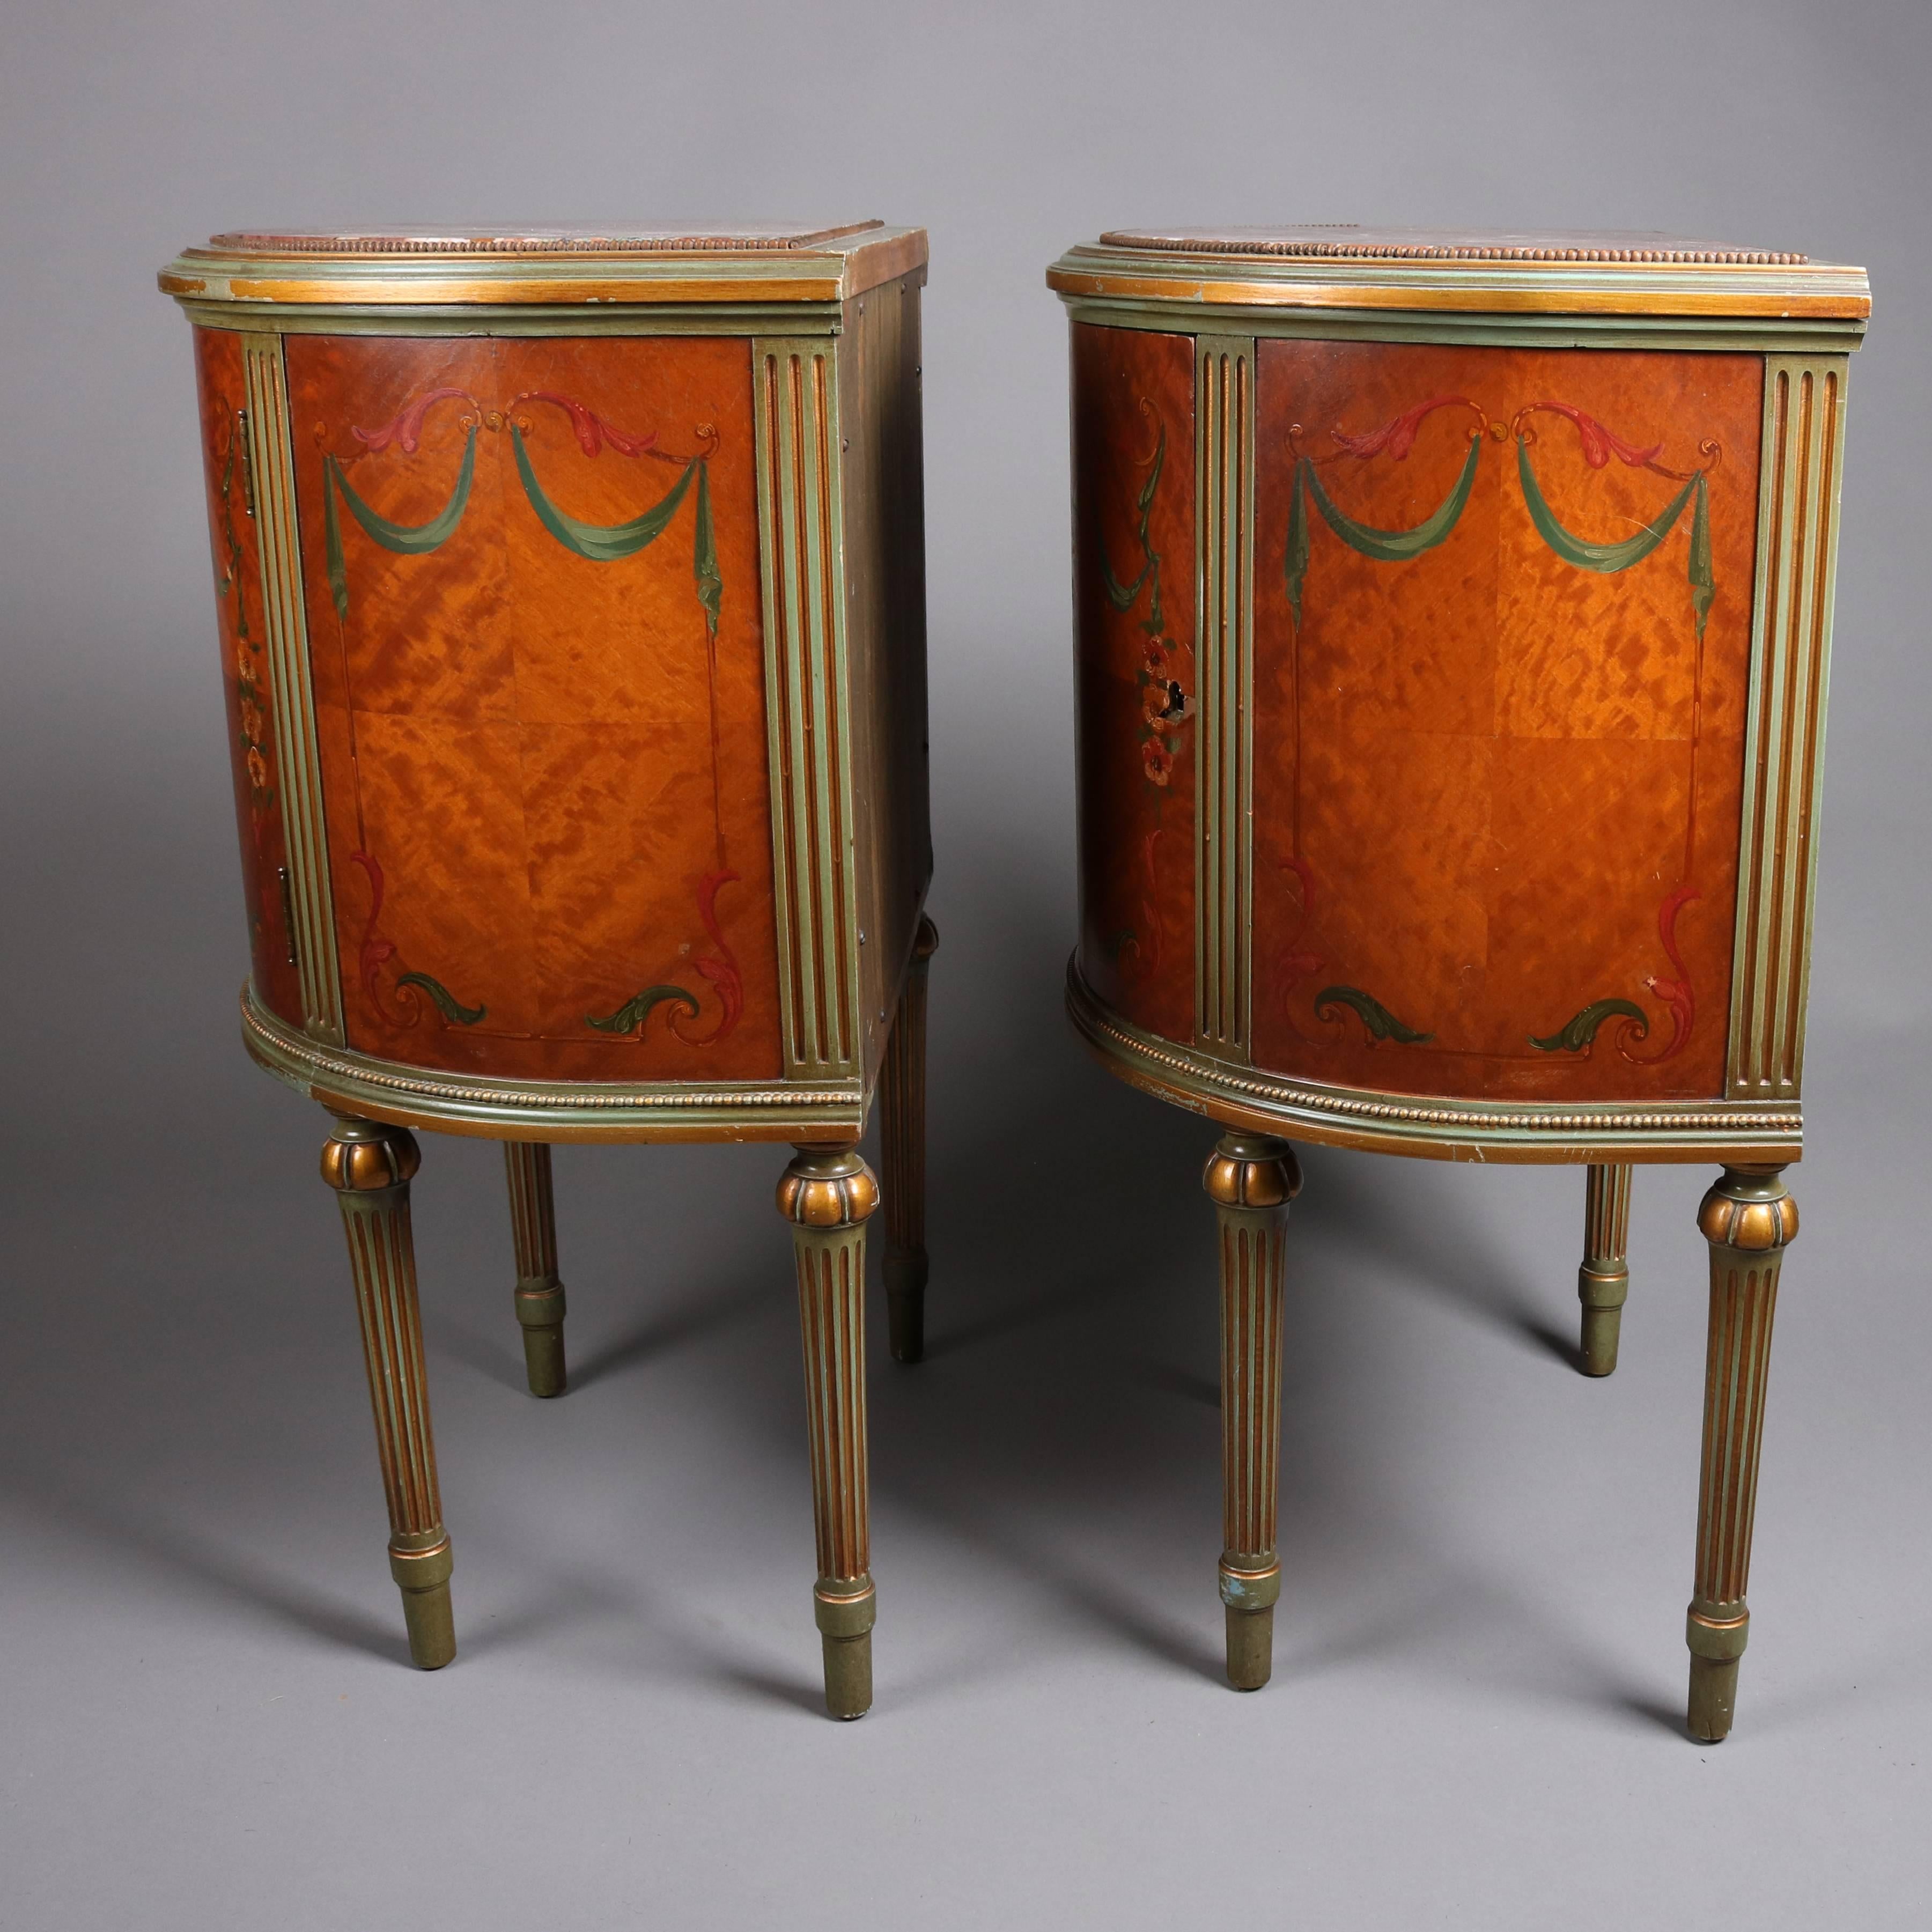 20th Century Pair of Adam Style Classical Painted and Gilt Carved Satinwood Demilune Stands